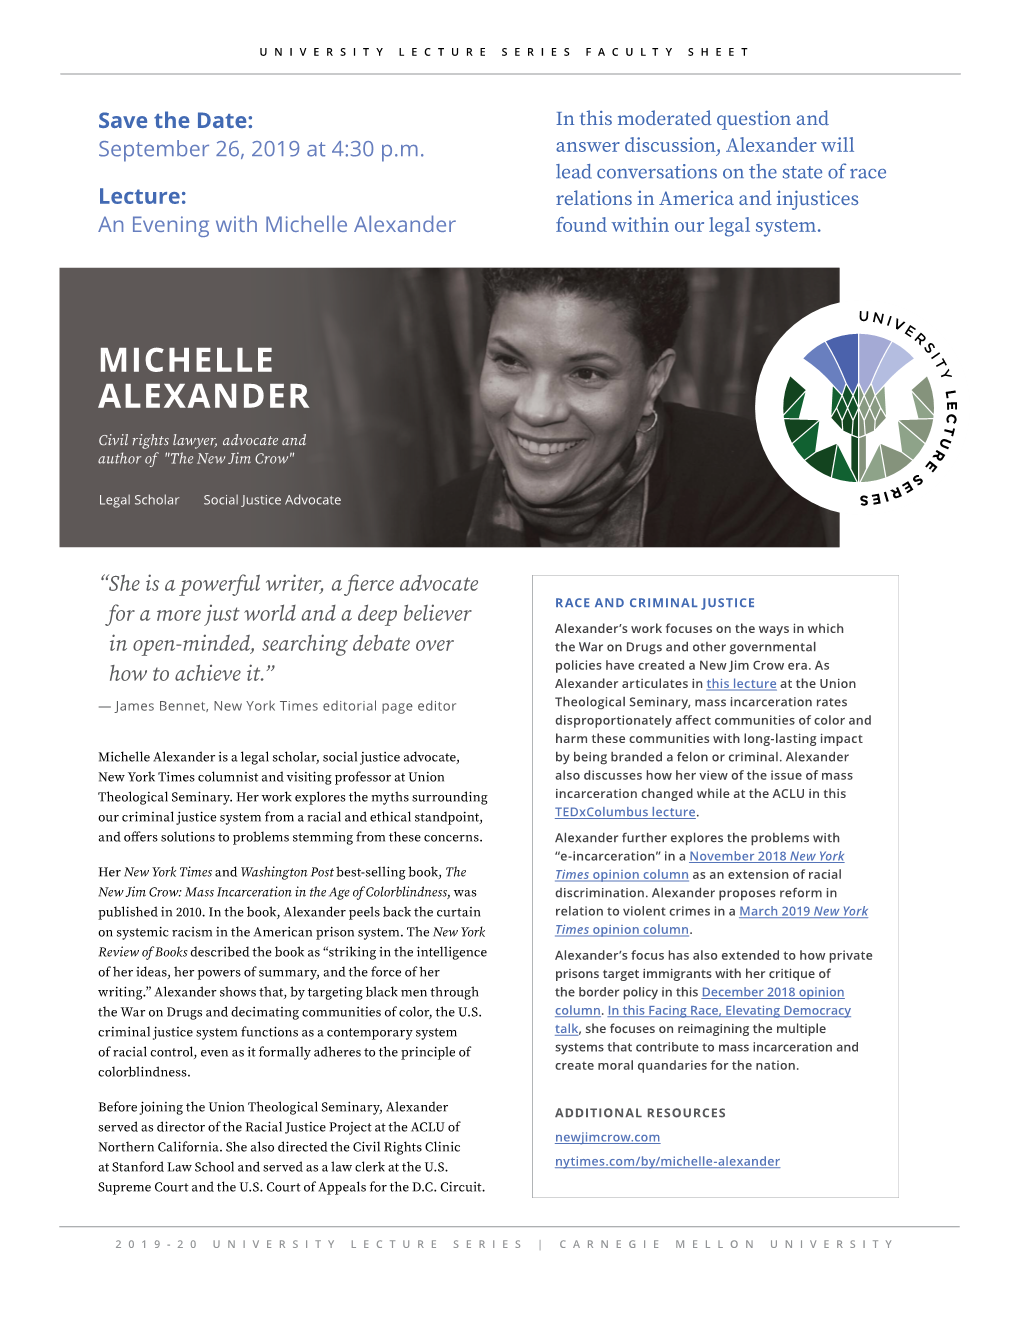 Michelle Alexander Found Within Our Legal System